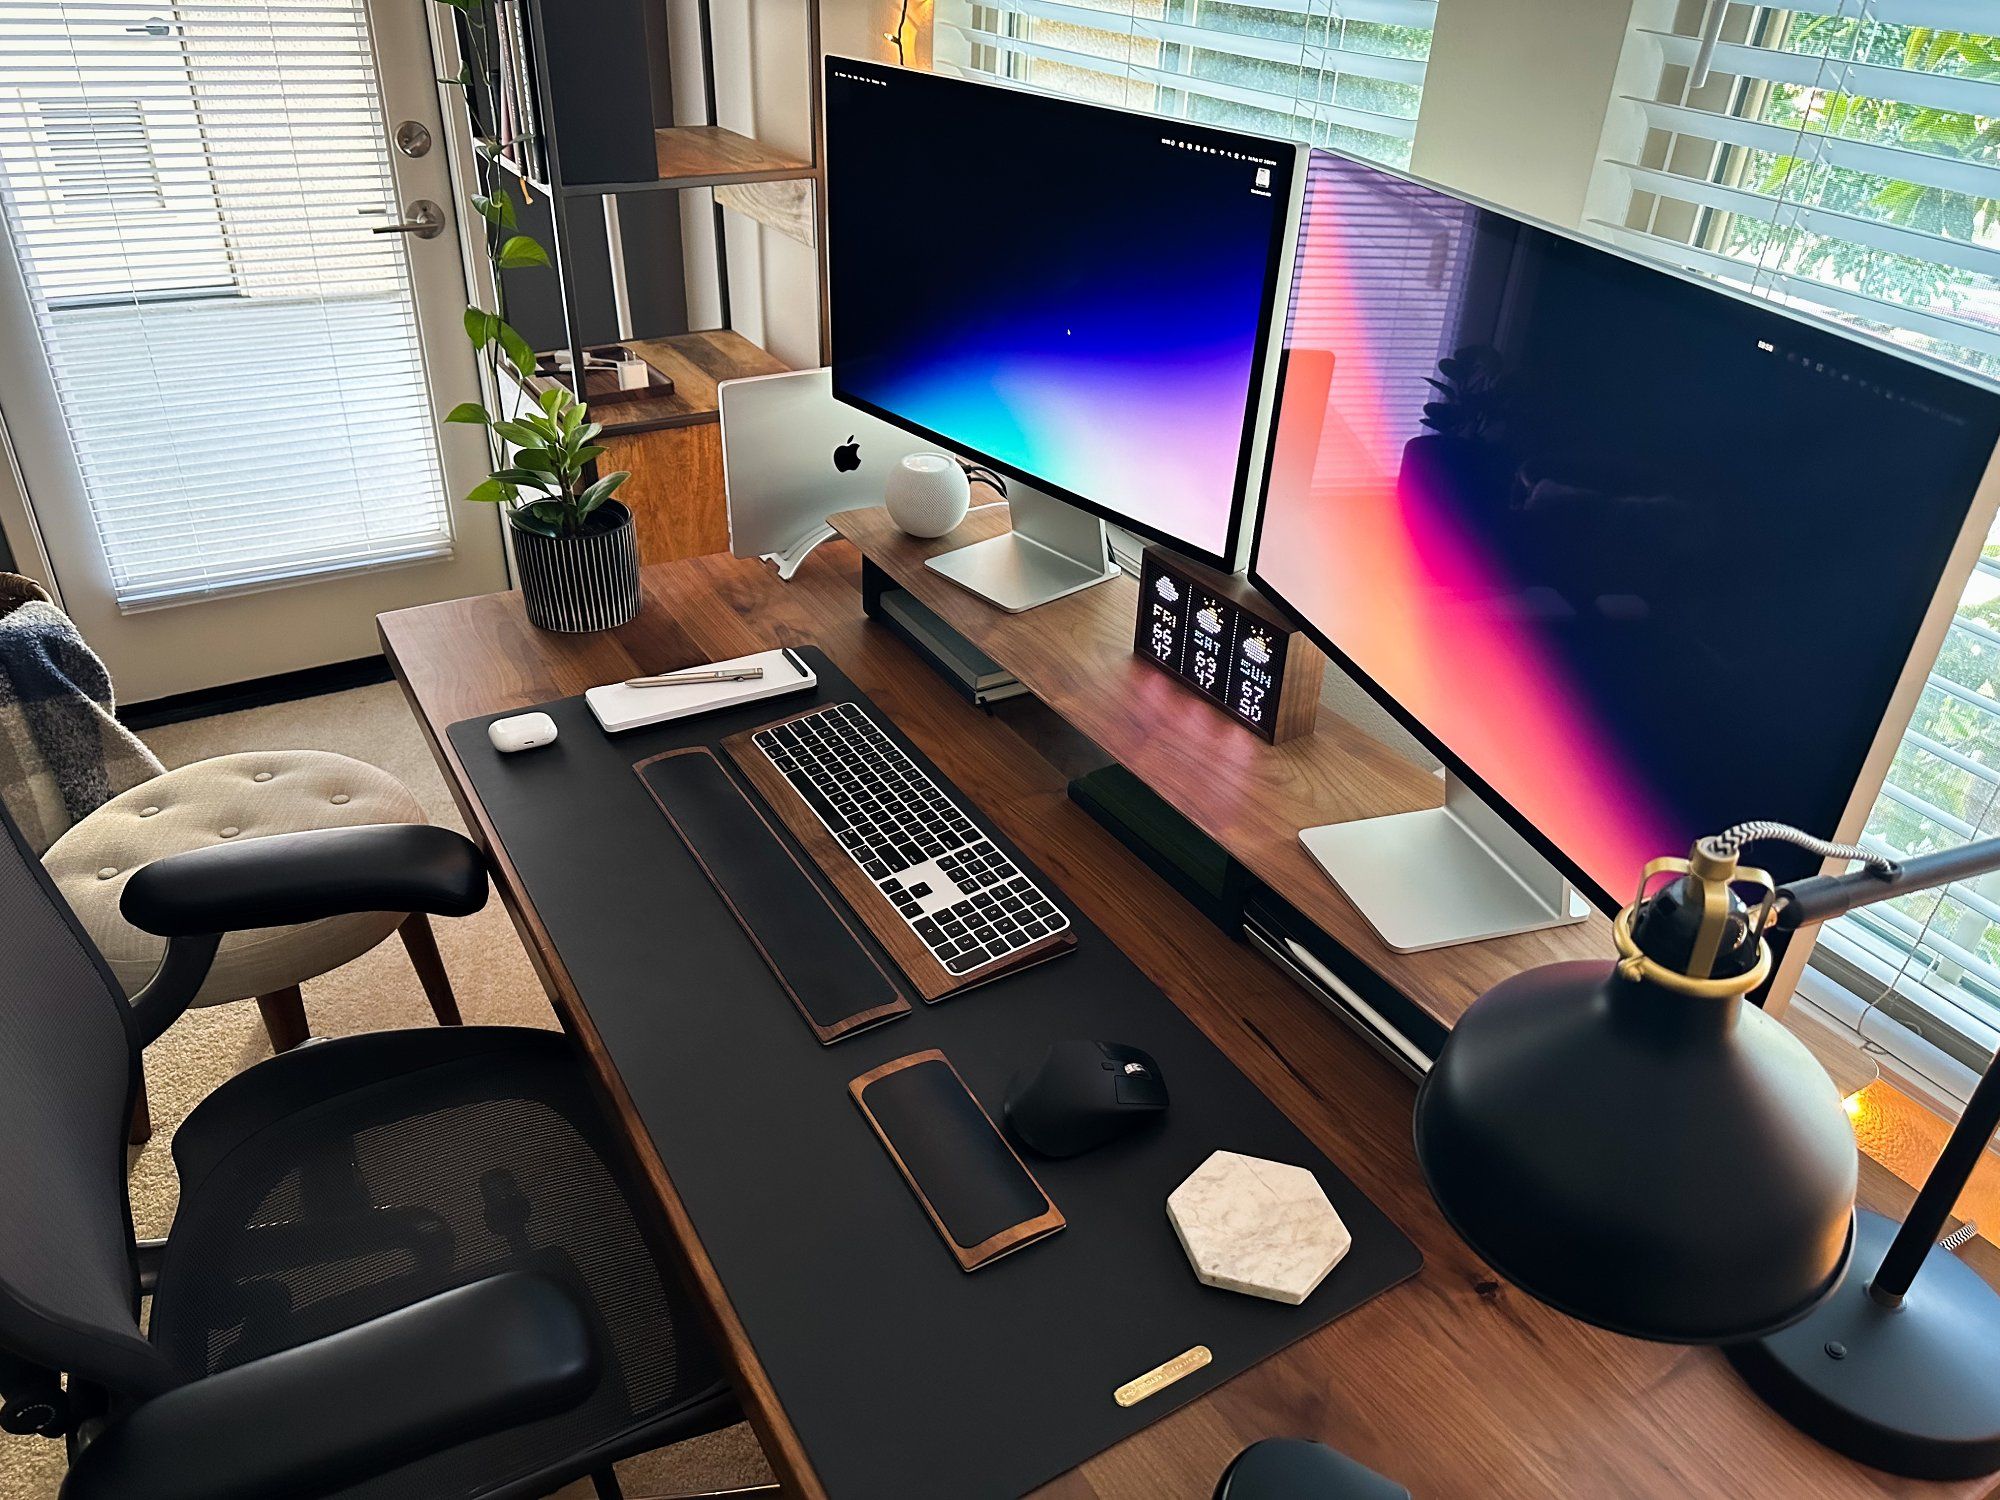 A freelance developer home office setup featuring two Apple Studio monitors, a MacBook Pro along with other Apple devices, a task lamp, and a houseplant